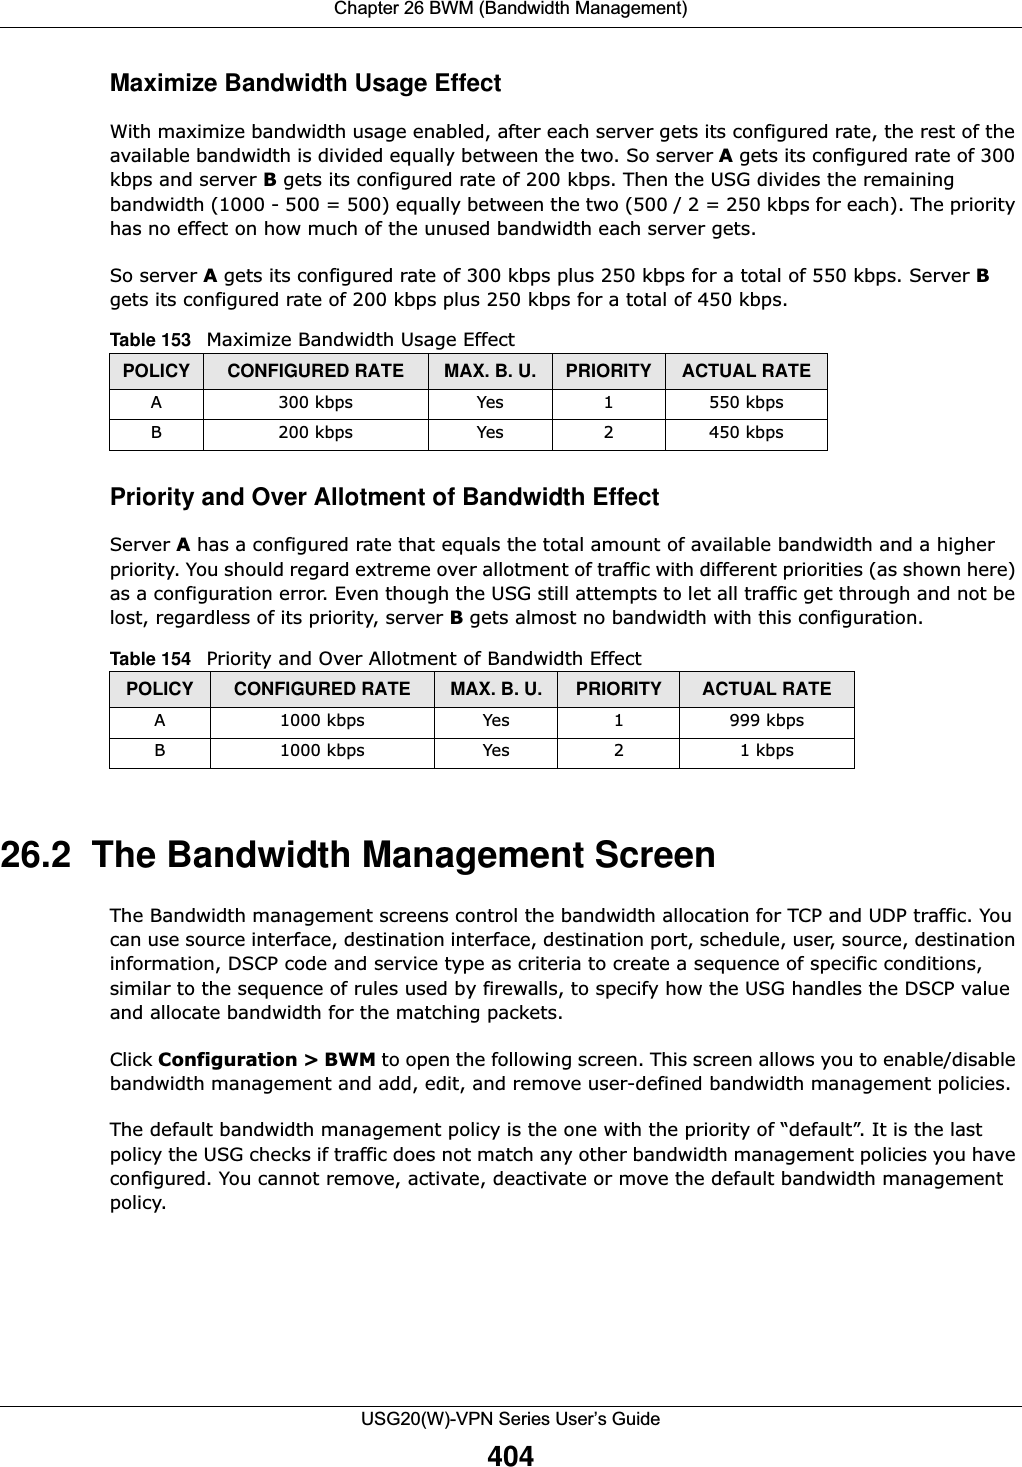 Chapter 26 BWM (Bandwidth Management)USG20(W)-VPN Series User’s Guide404Maximize Bandwidth Usage EffectWith maximize bandwidth usage enabled, after each server gets its configured rate, the rest of the available bandwidth is divided equally between the two. So server A gets its configured rate of 300 kbps and server B gets its configured rate of 200 kbps. Then the USG divides the remaining bandwidth (1000 - 500 = 500) equally between the two (500 / 2 = 250 kbps for each). The priority has no effect on how much of the unused bandwidth each server gets.So server A gets its configured rate of 300 kbps plus 250 kbps for a total of 550 kbps. Server B gets its configured rate of 200 kbps plus 250 kbps for a total of 450 kbps.    Priority and Over Allotment of Bandwidth EffectServer A has a configured rate that equals the total amount of available bandwidth and a higher priority. You should regard extreme over allotment of traffic with different priorities (as shown here) as a configuration error. Even though the USG still attempts to let all traffic get through and not be lost, regardless of its priority, server B gets almost no bandwidth with this configuration.    26.2  The Bandwidth Management ScreenThe Bandwidth management screens control the bandwidth allocation for TCP and UDP traffic. You can use source interface, destination interface, destination port, schedule, user, source, destination information, DSCP code and service type as criteria to create a sequence of specific conditions, similar to the sequence of rules used by firewalls, to specify how the USG handles the DSCP value and allocate bandwidth for the matching packets.Click Configuration &gt; BWM to open the following screen. This screen allows you to enable/disable bandwidth management and add, edit, and remove user-defined bandwidth management policies.The default bandwidth management policy is the one with the priority of “default”. It is the last policy the USG checks if traffic does not match any other bandwidth management policies you have configured. You cannot remove, activate, deactivate or move the default bandwidth management policy.Table 153   Maximize Bandwidth Usage EffectPOLICY CONFIGURED RATE MAX. B. U. PRIORITY ACTUAL RATEA 300 kbps Yes 1 550 kbpsB 200 kbps Yes 2 450 kbpsTable 154   Priority and Over Allotment of Bandwidth EffectPOLICY CONFIGURED RATE MAX. B. U. PRIORITY ACTUAL RATEA 1000 kbps Yes 1 999 kbpsB 1000 kbps Yes 2 1 kbps